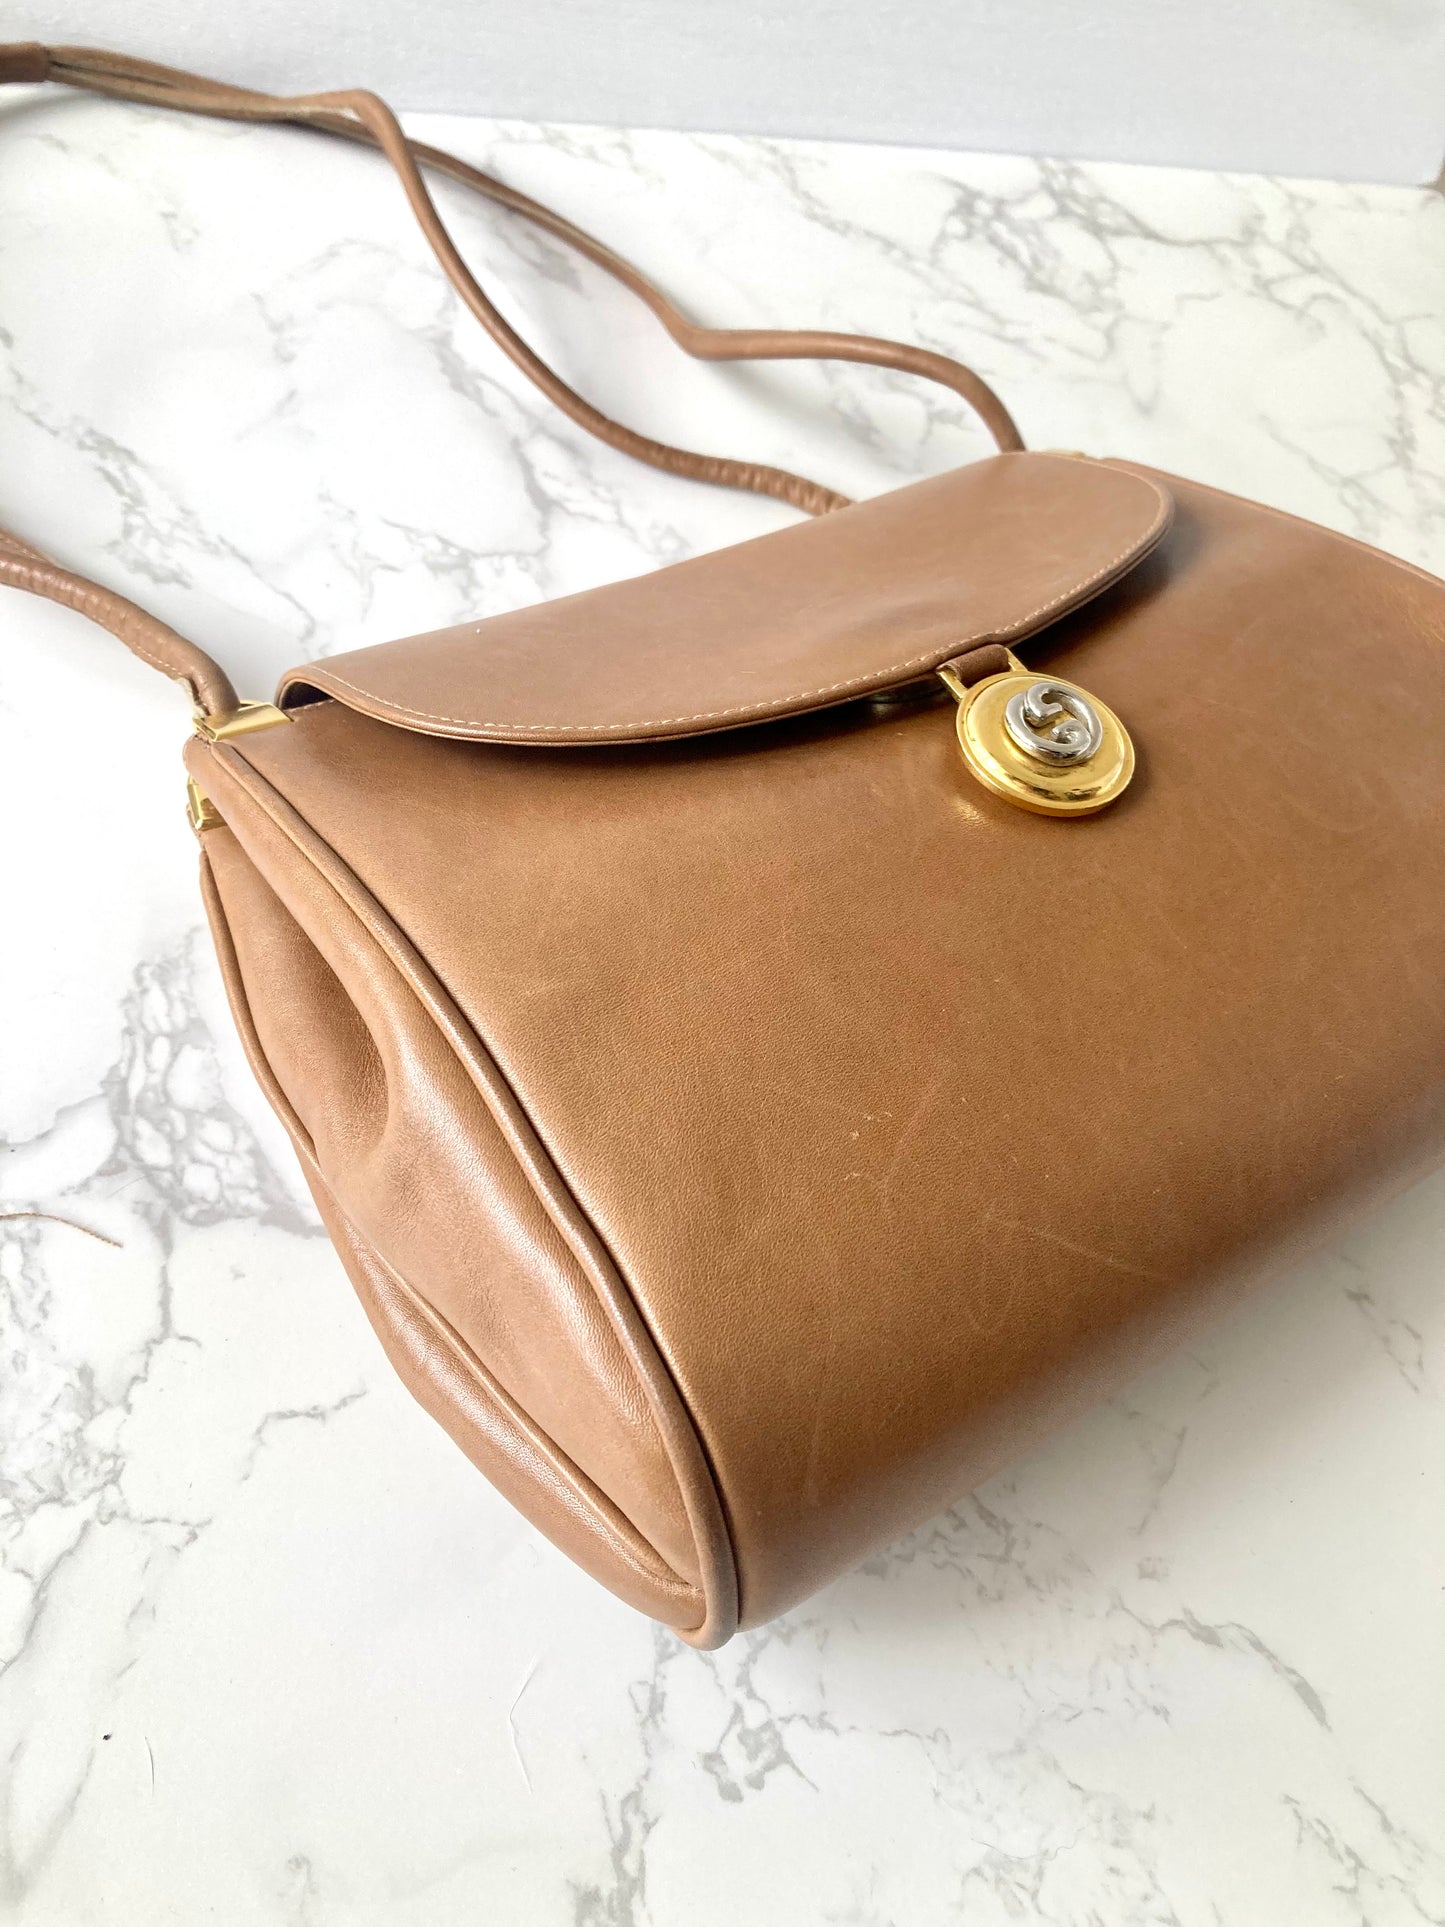 GUCCI Rare Caramel Brown x Gold Coin Leather Shoulder Bag